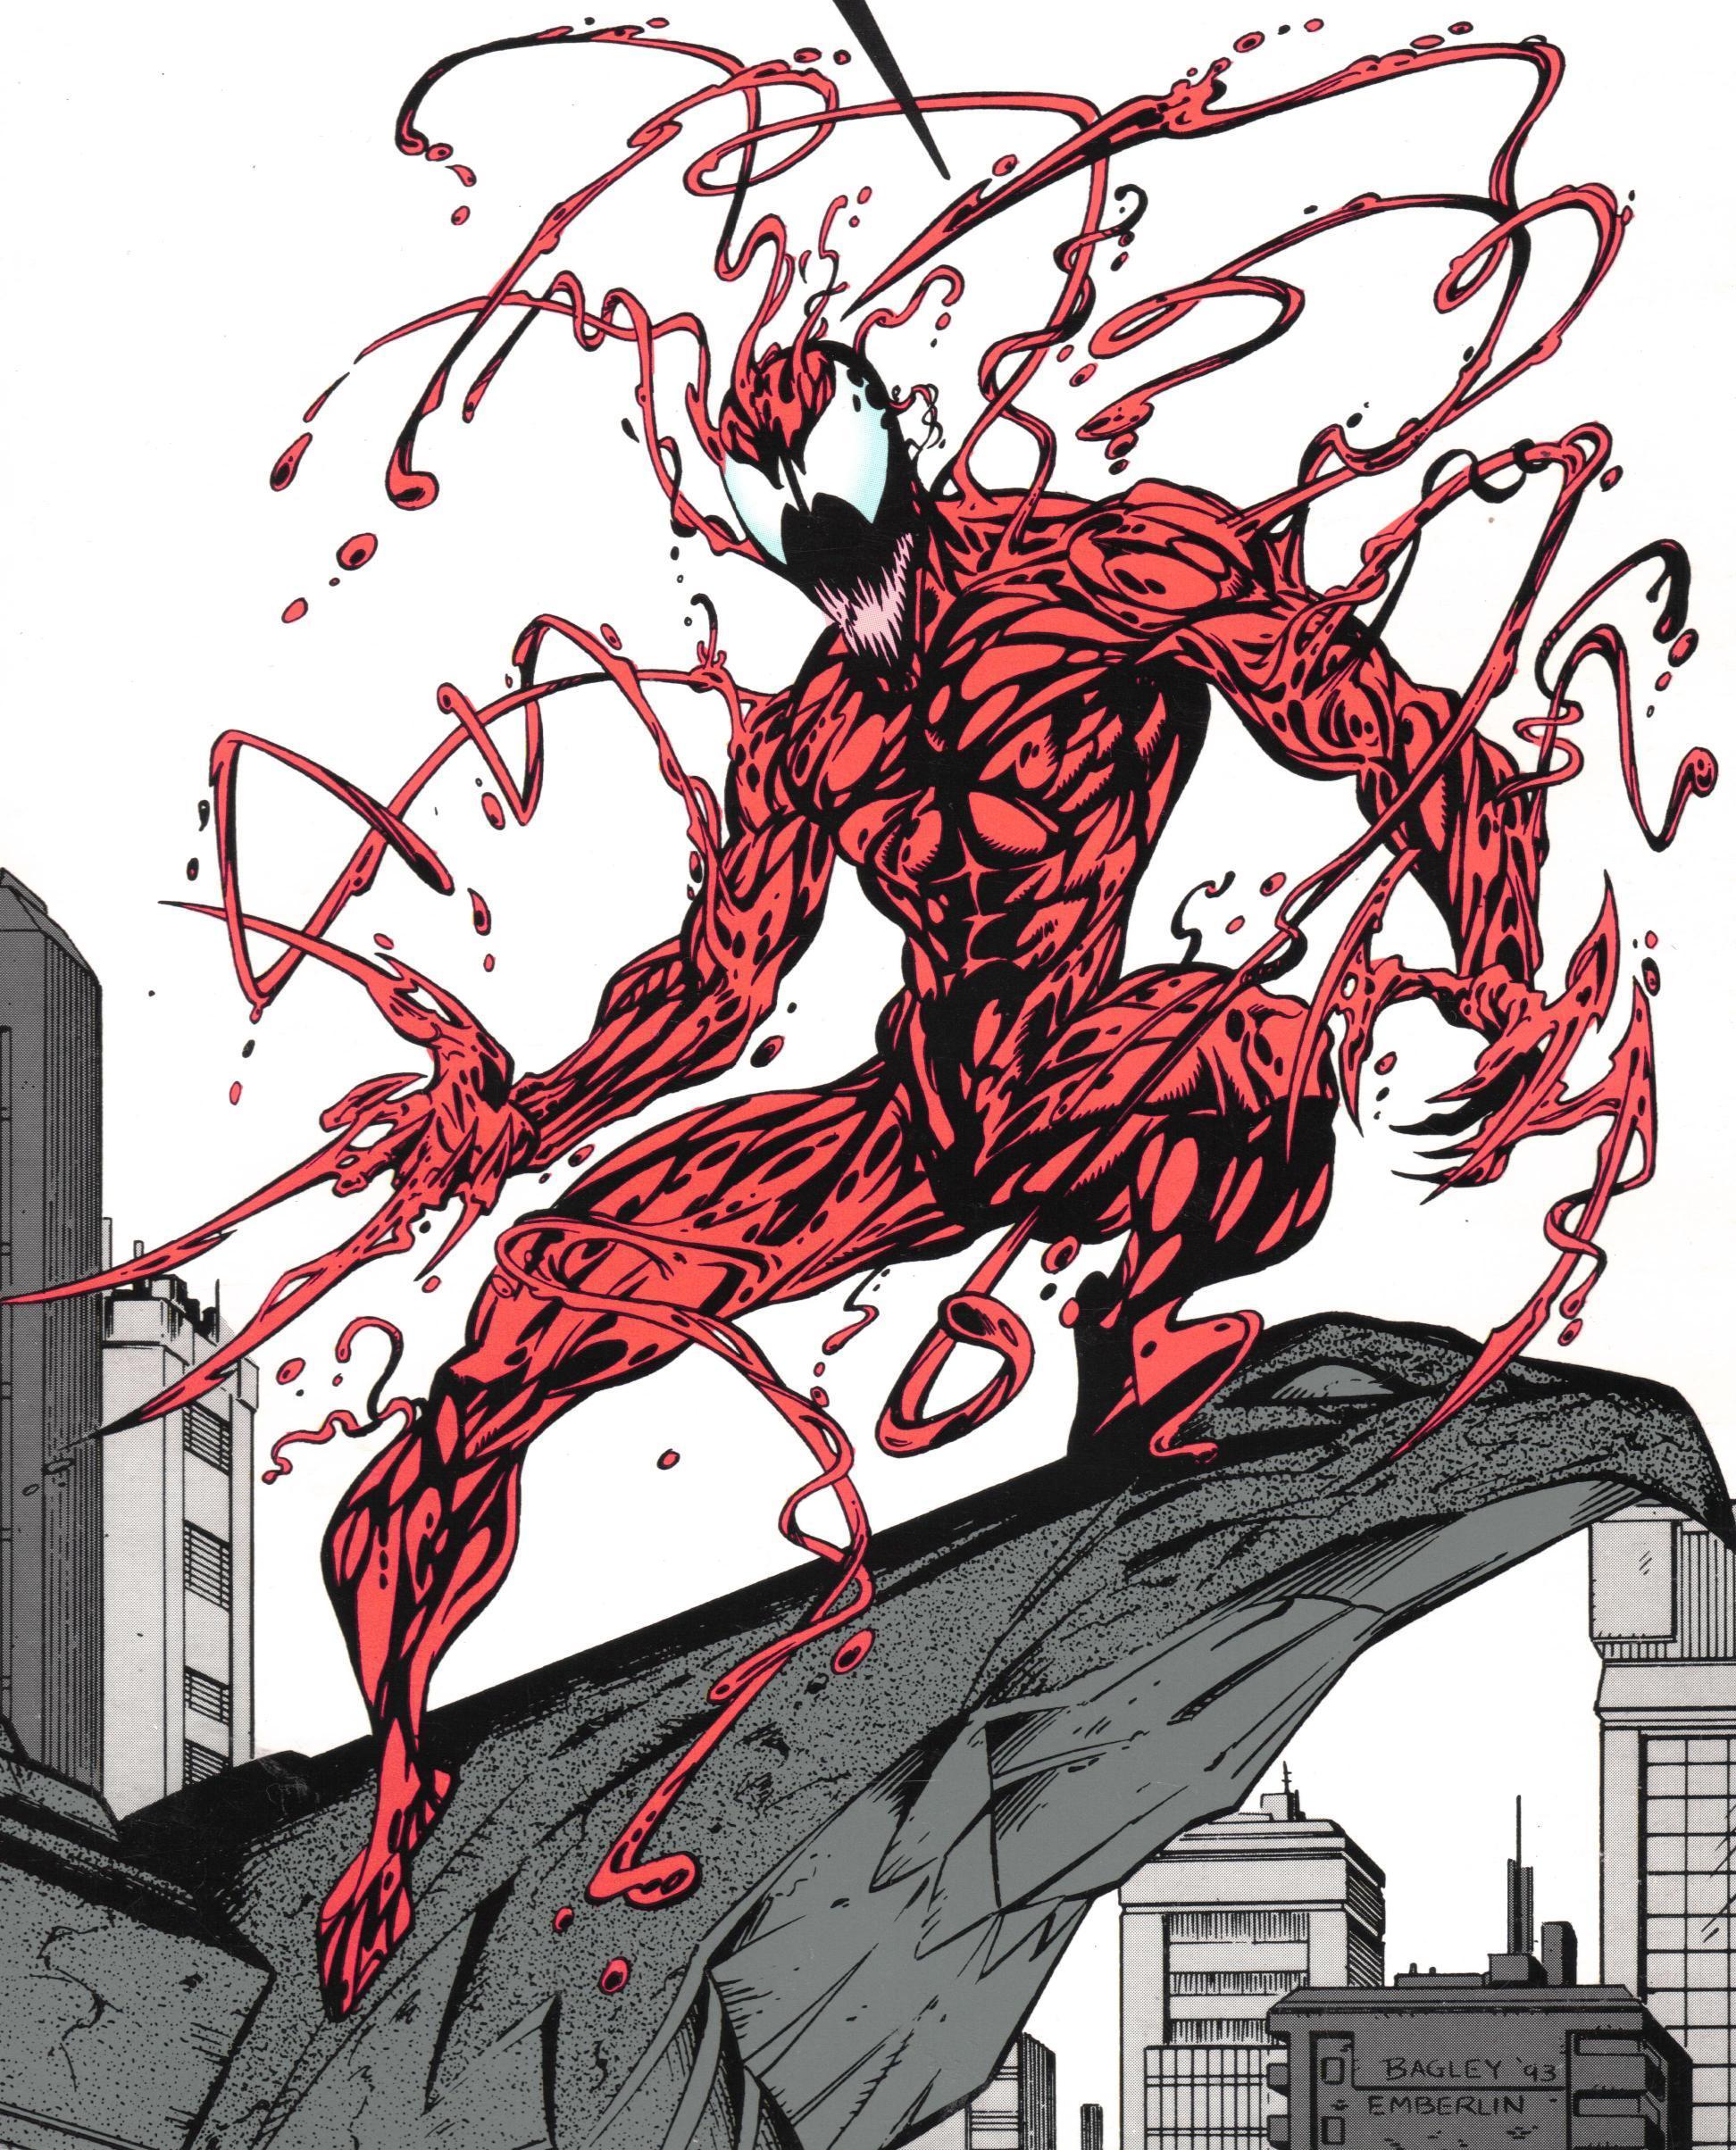 Marvel Ics Image Carnage HD Wallpaper And Background Photos